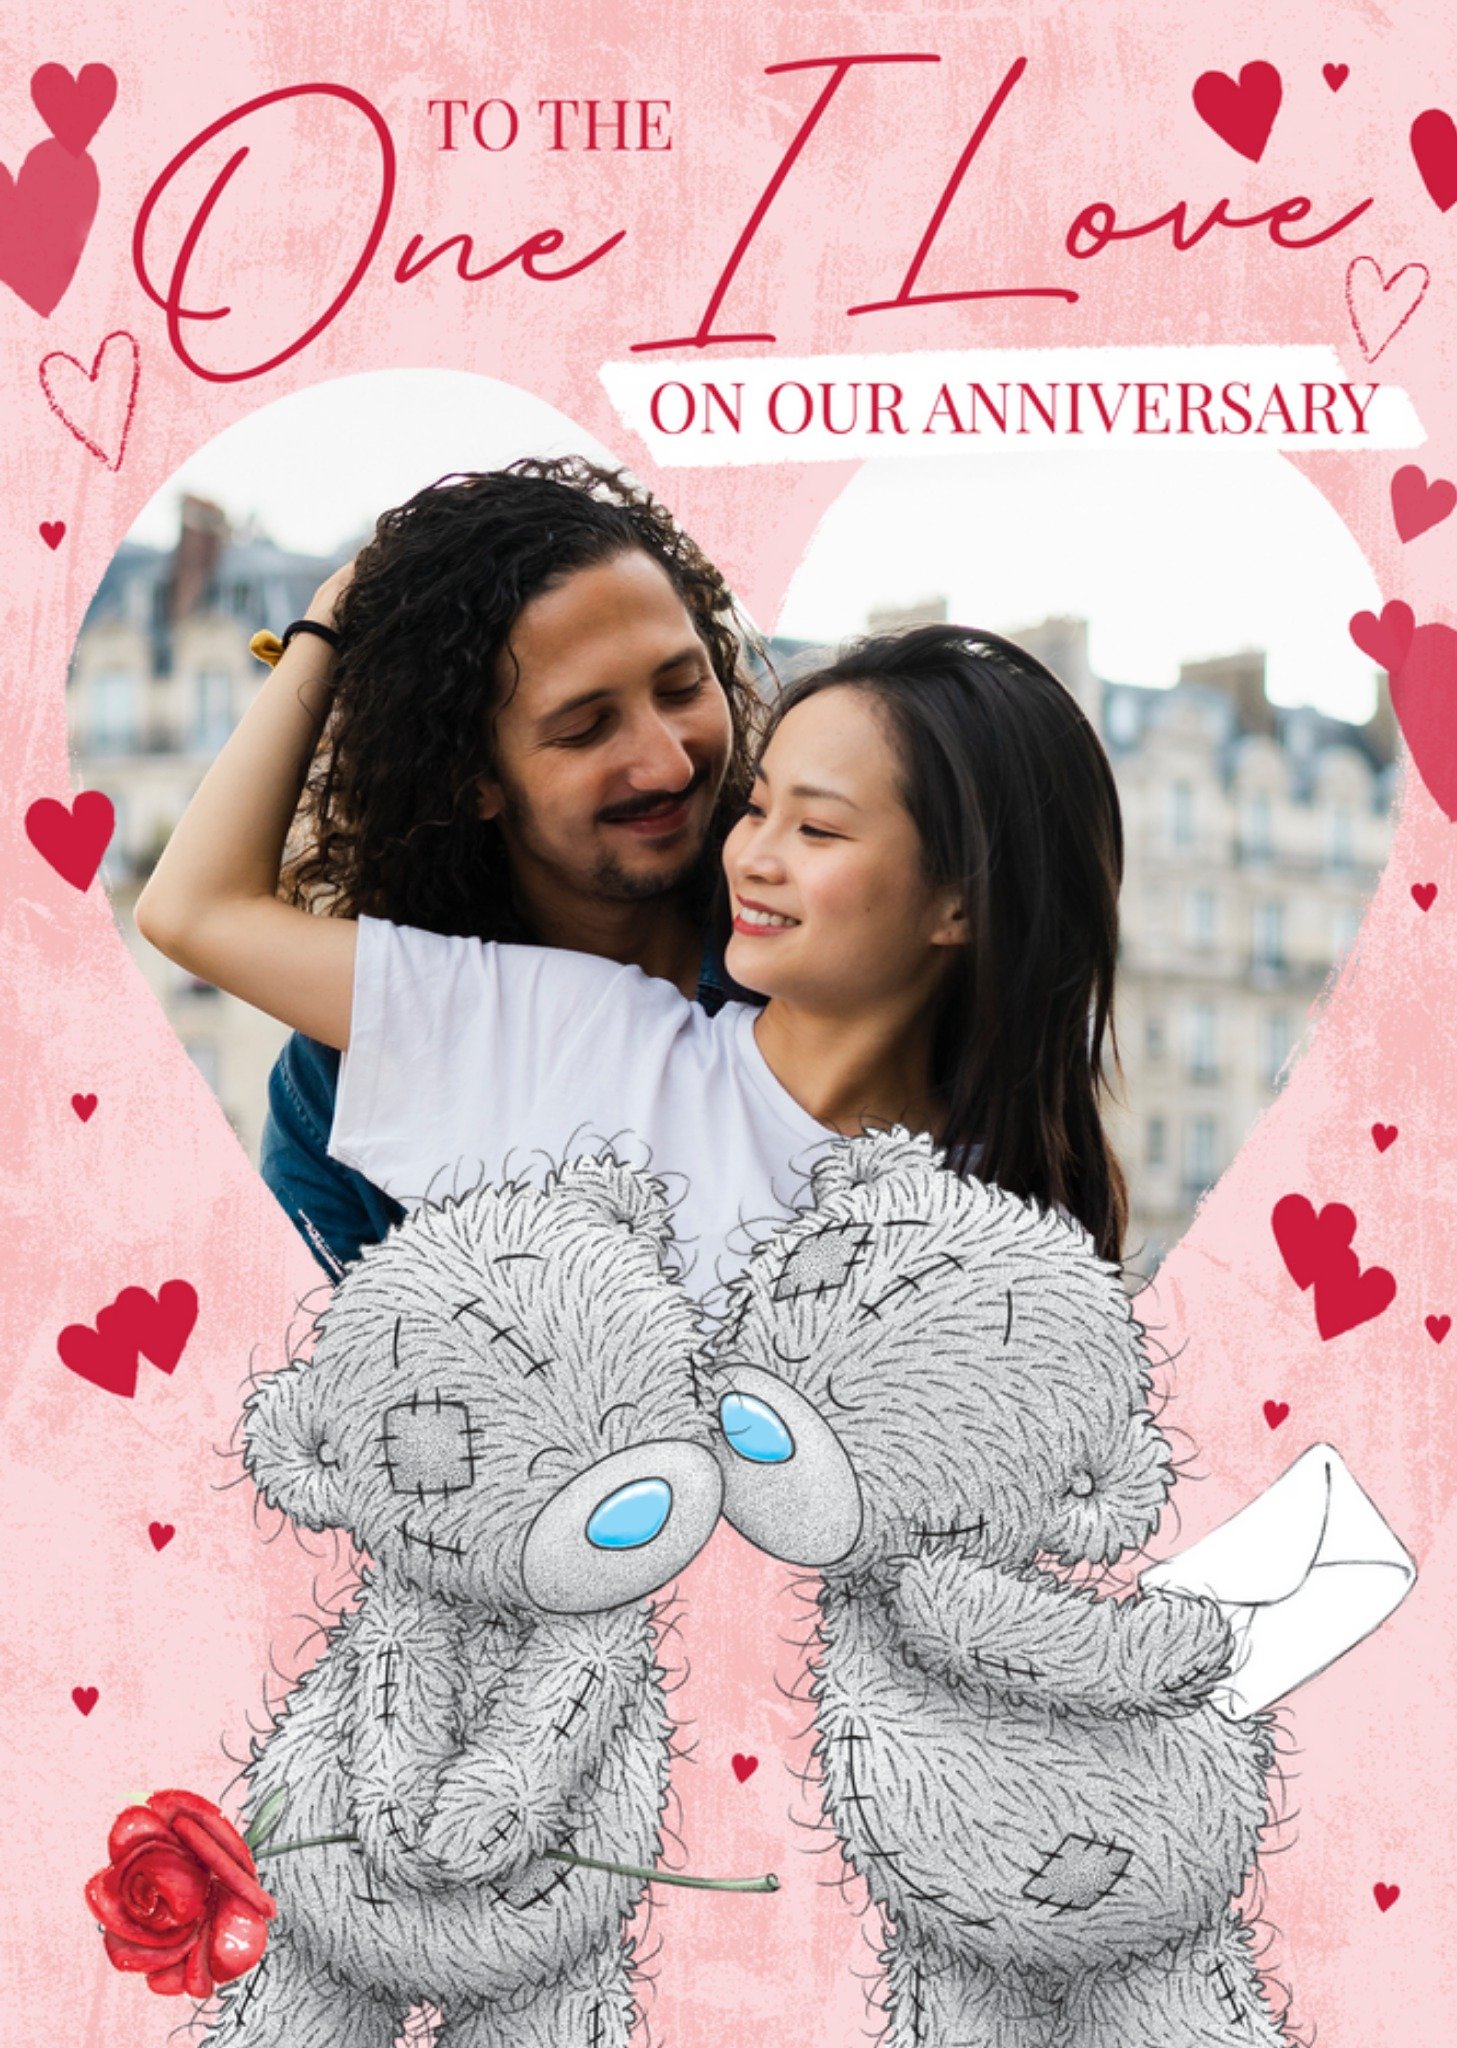 Me To You Tatty Teddy Photo Upload On Our Anniversary Card, Large